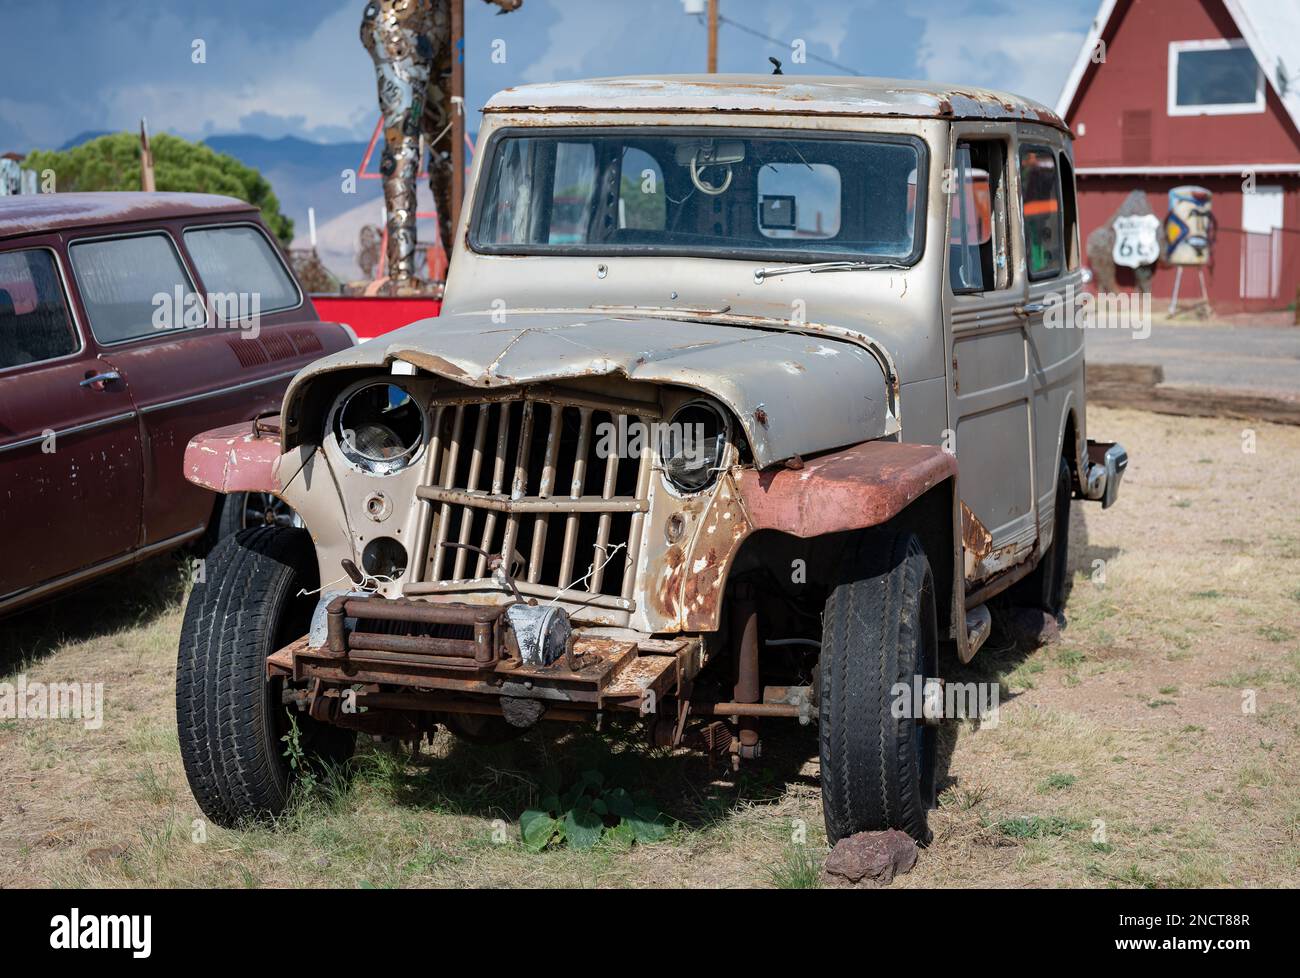 A Former SUV Willys Jeep Station Wagon is damaged in the front with a blow to the radiator grill Stock Photo